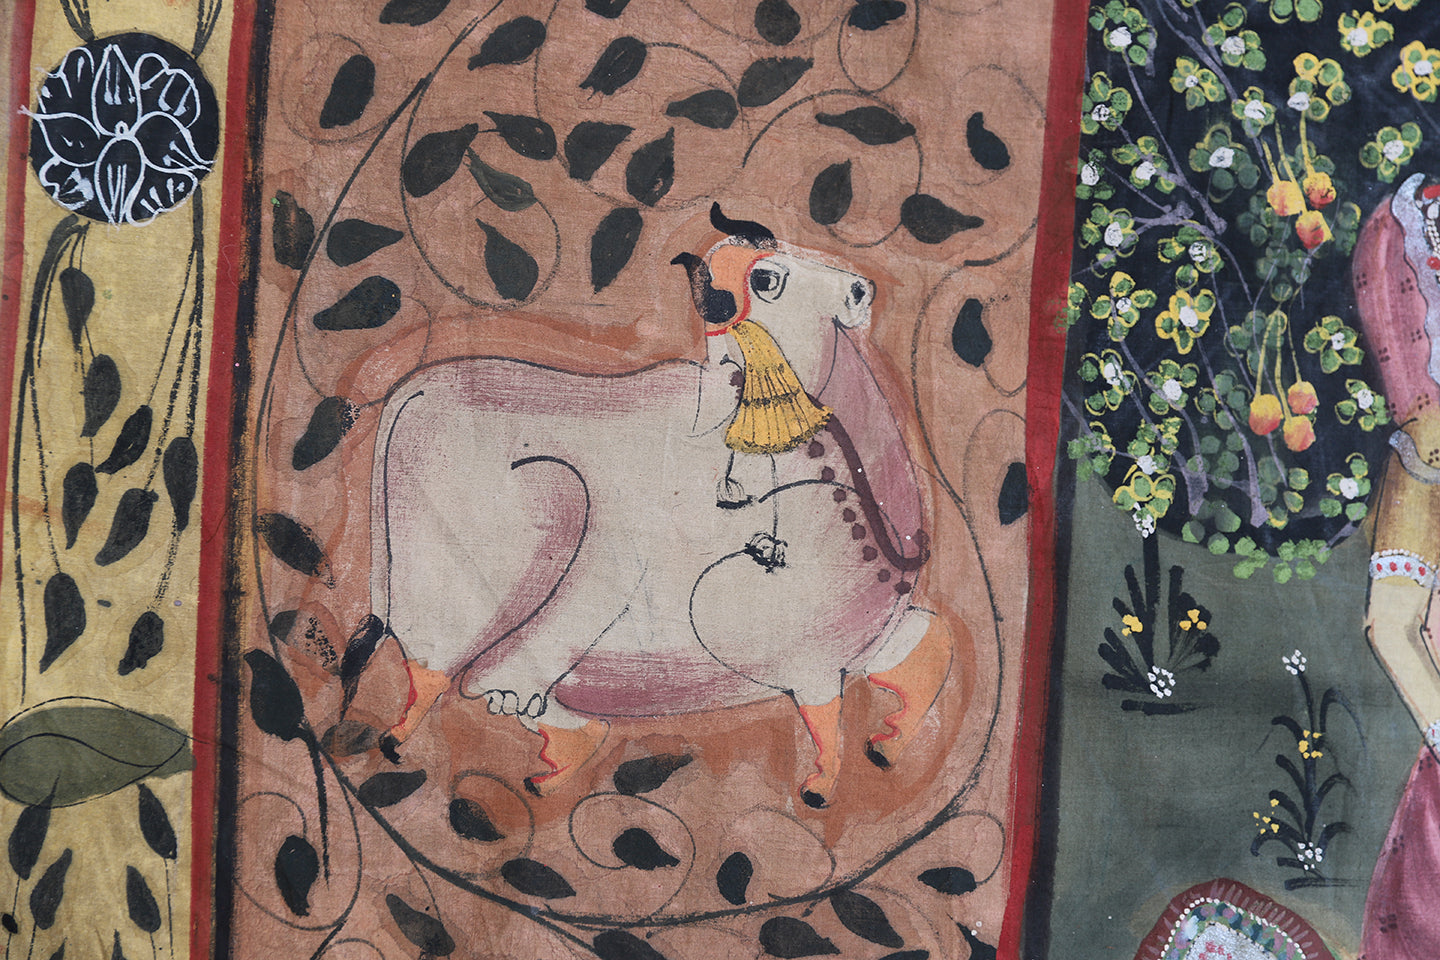 ANTIQUE PICHWAI PAINTING ON CLOTH FROM NATHDWARA RAJASTHAN